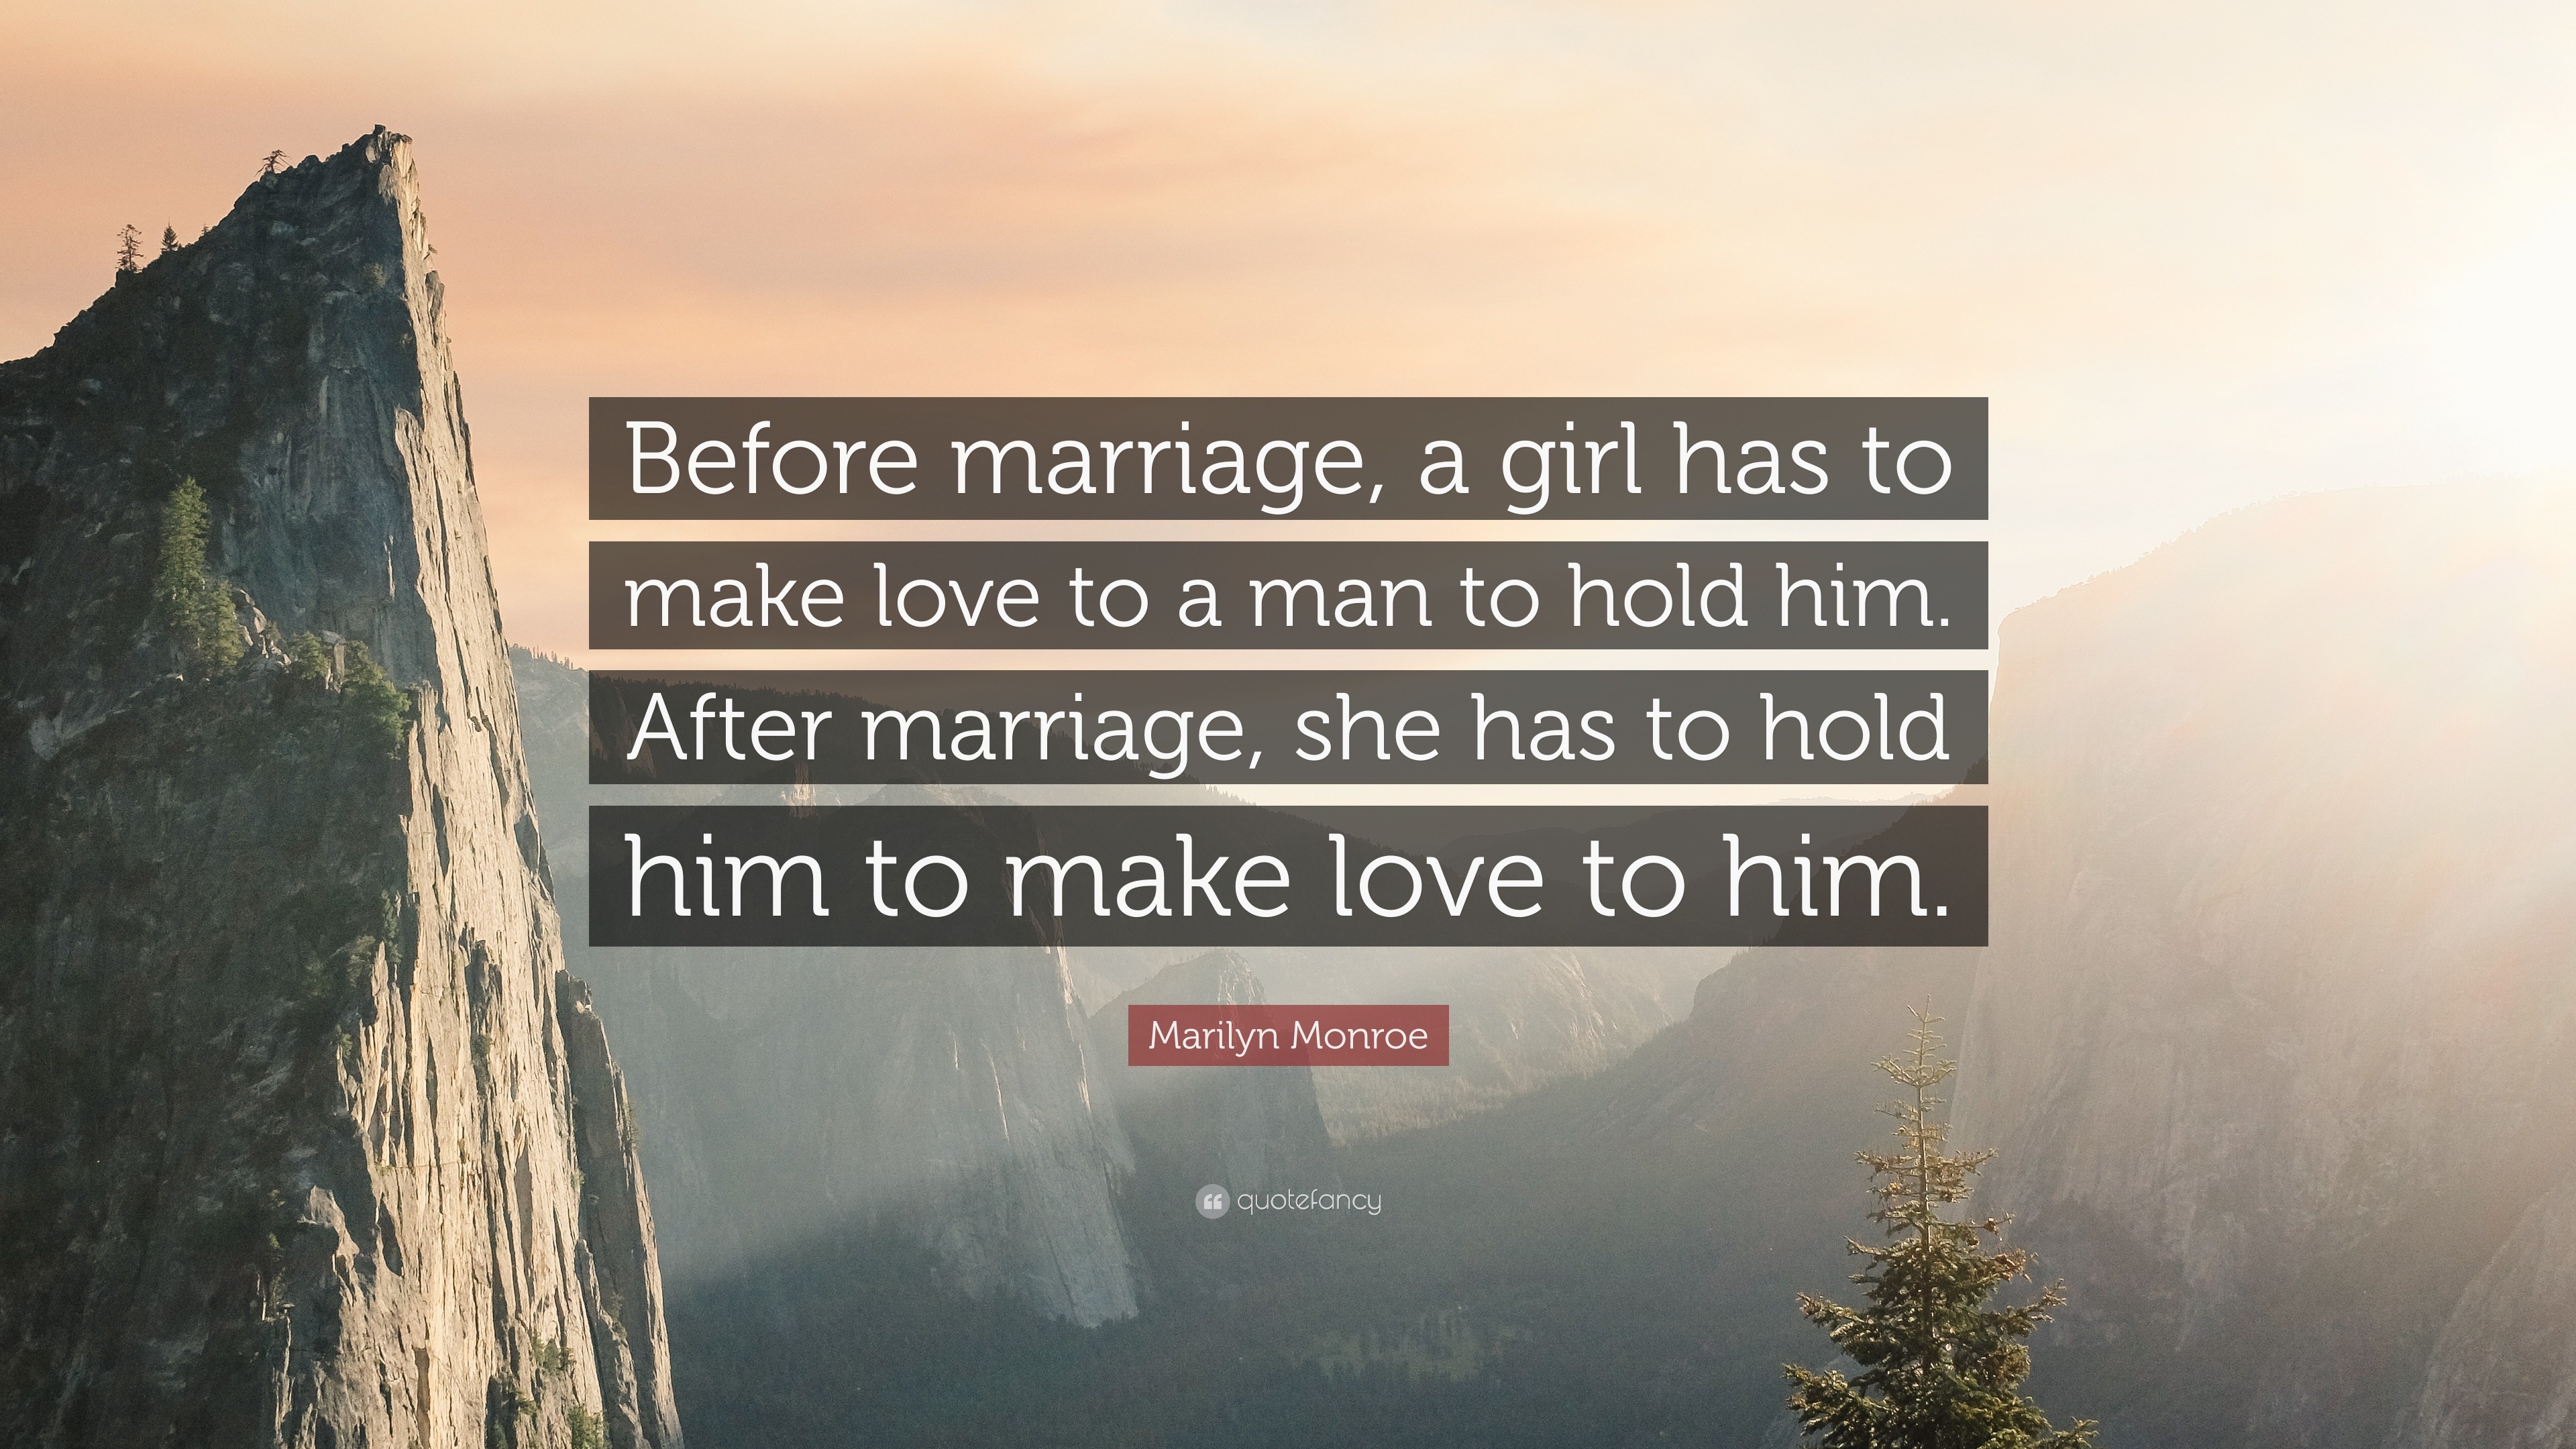 Marilyn Monroe Quote “Before marriage a girl has to make love to a